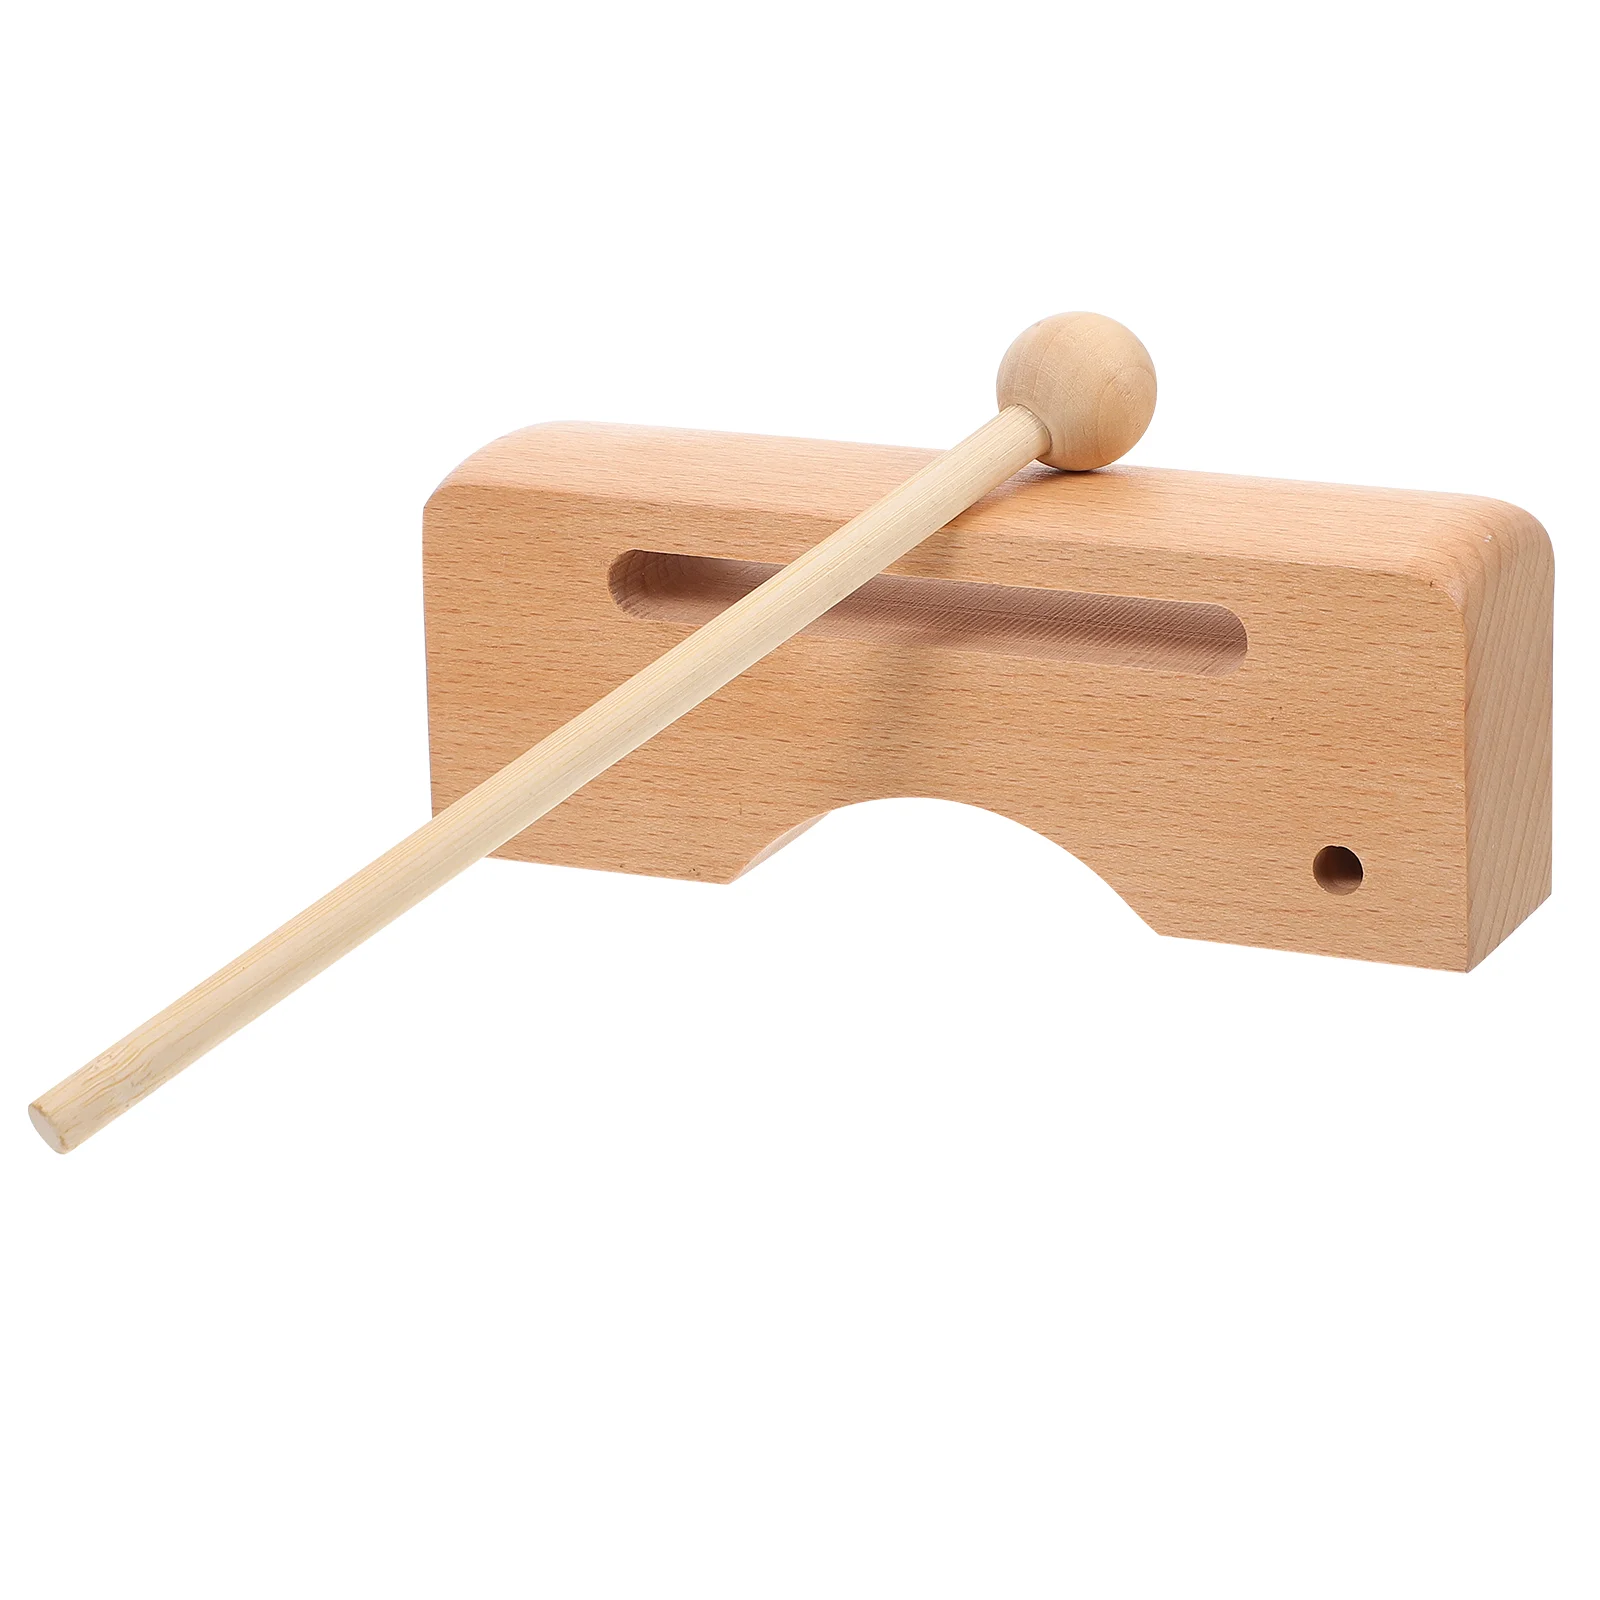 Wooden Toys Musical Toy Kids Musical Toys Rhythm Stick Block Wood Block Instrument Percussion Drum enlarge